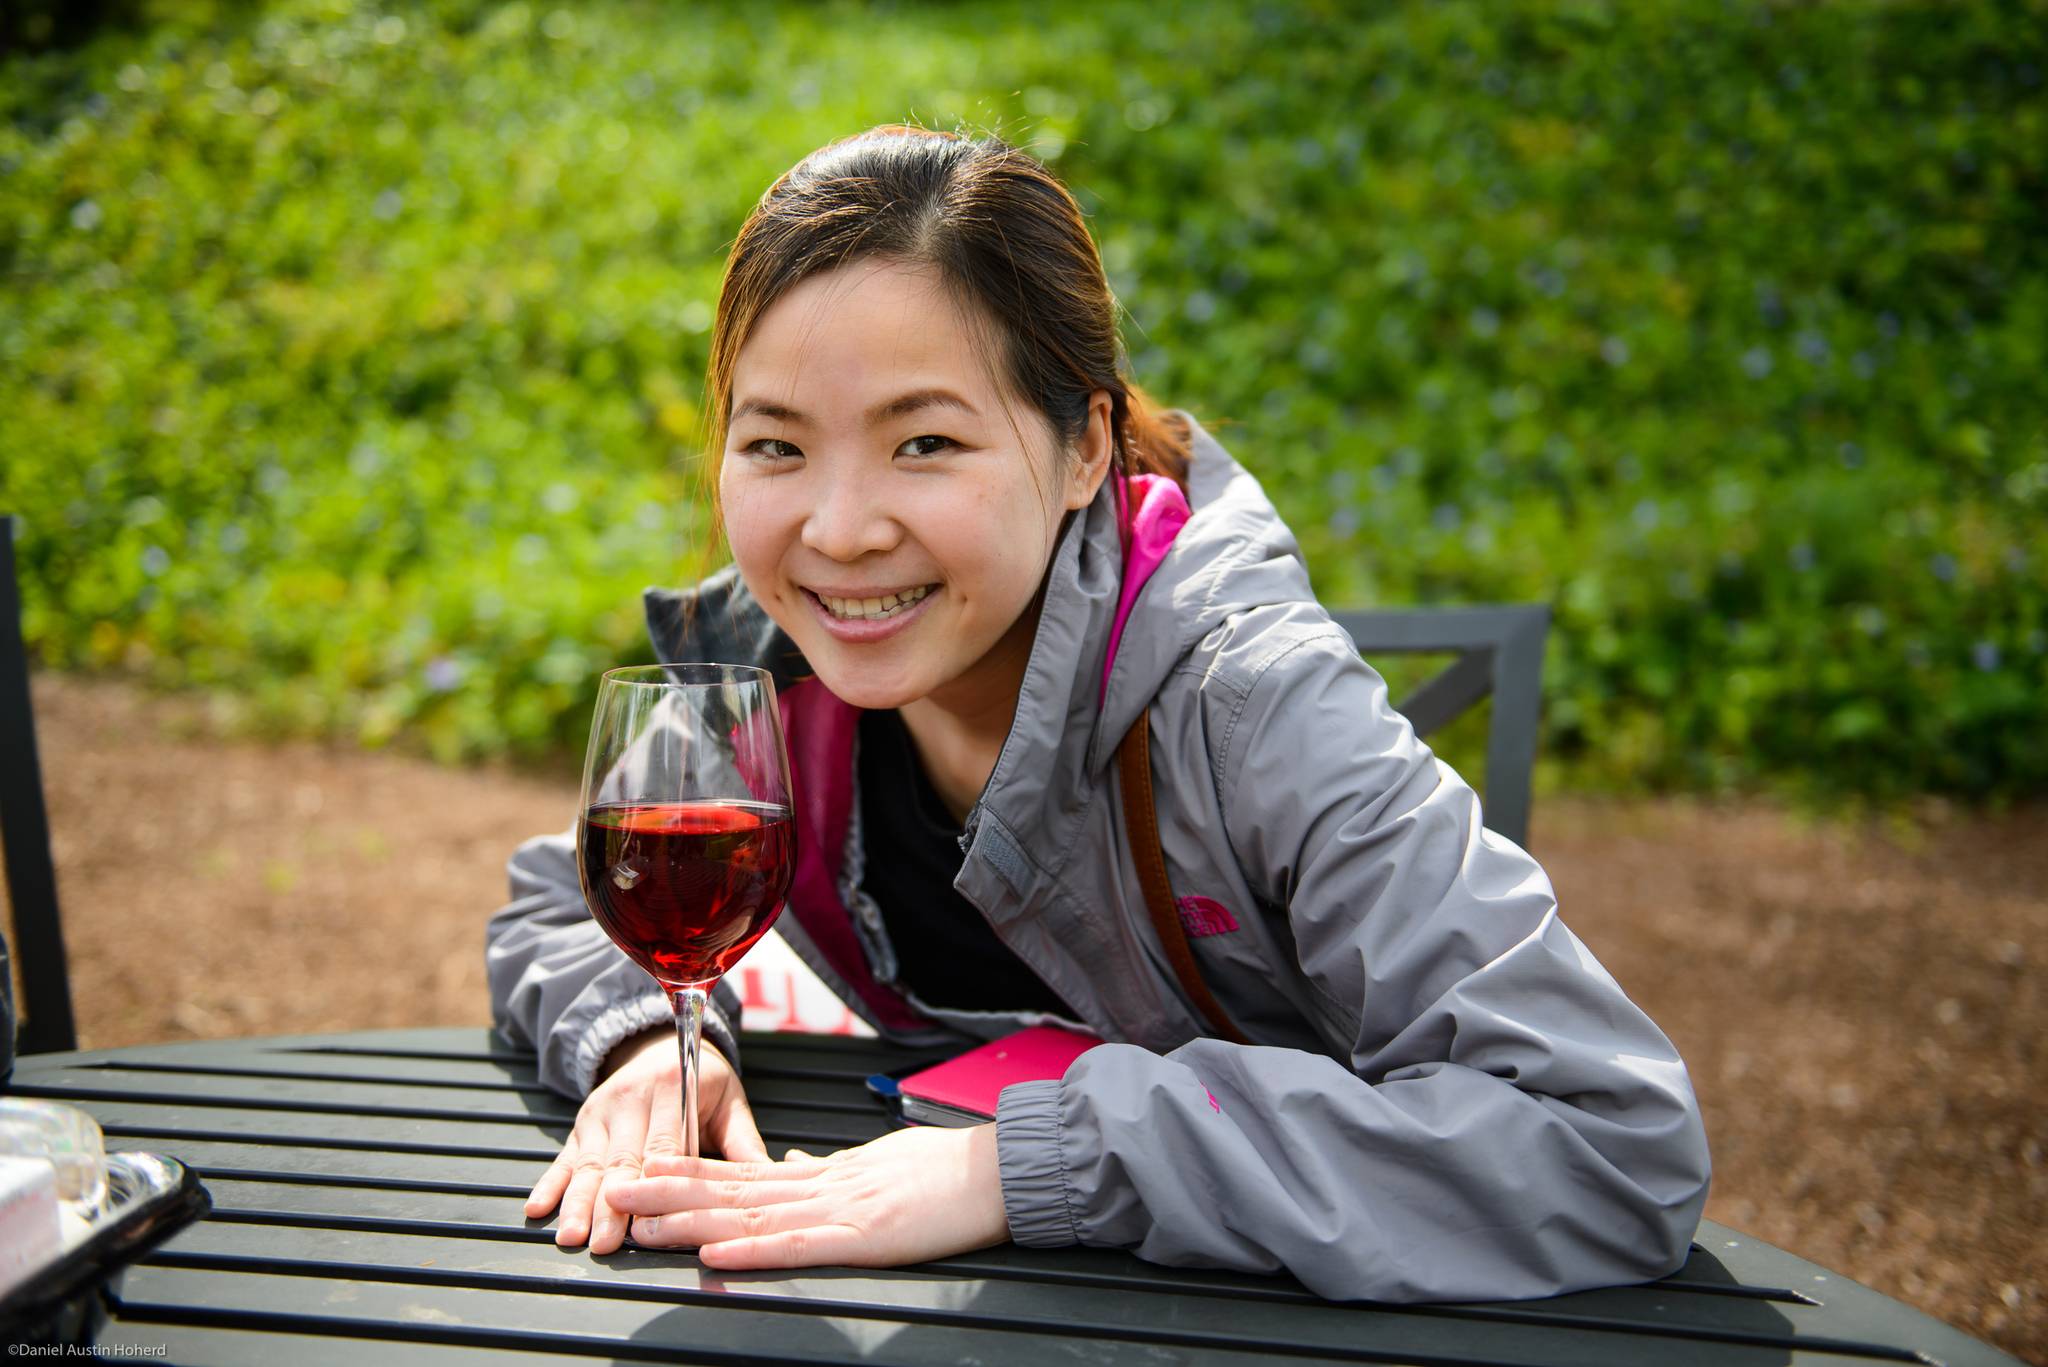 The challenge of importing wine into China